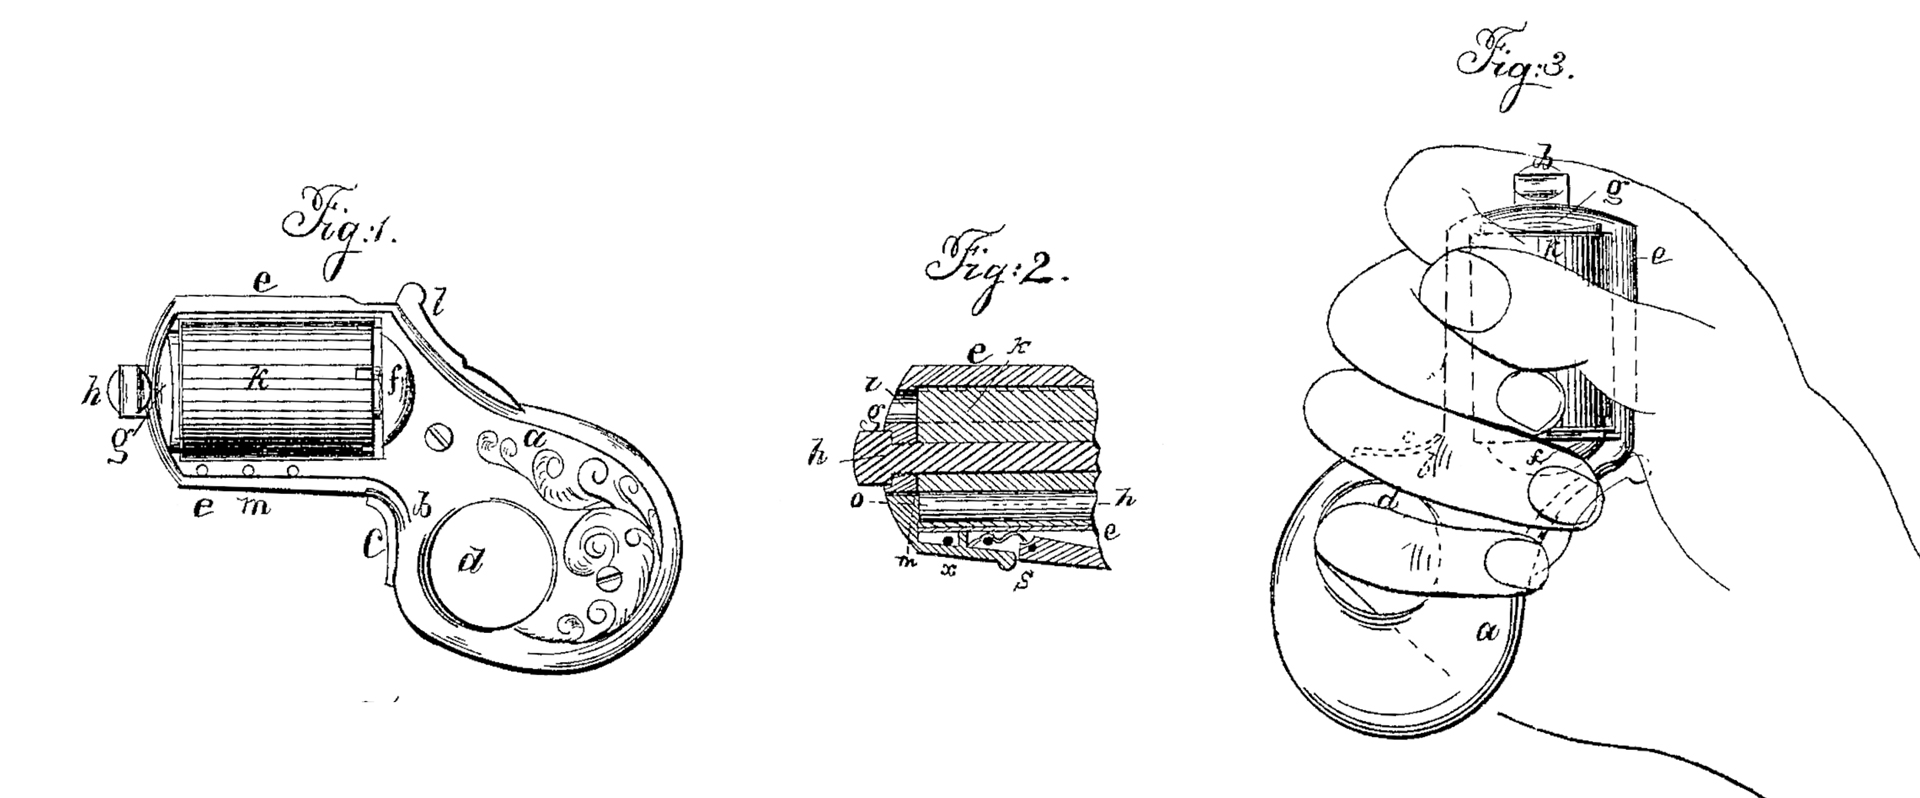 James Reid Knuckle-Duster patent drawing